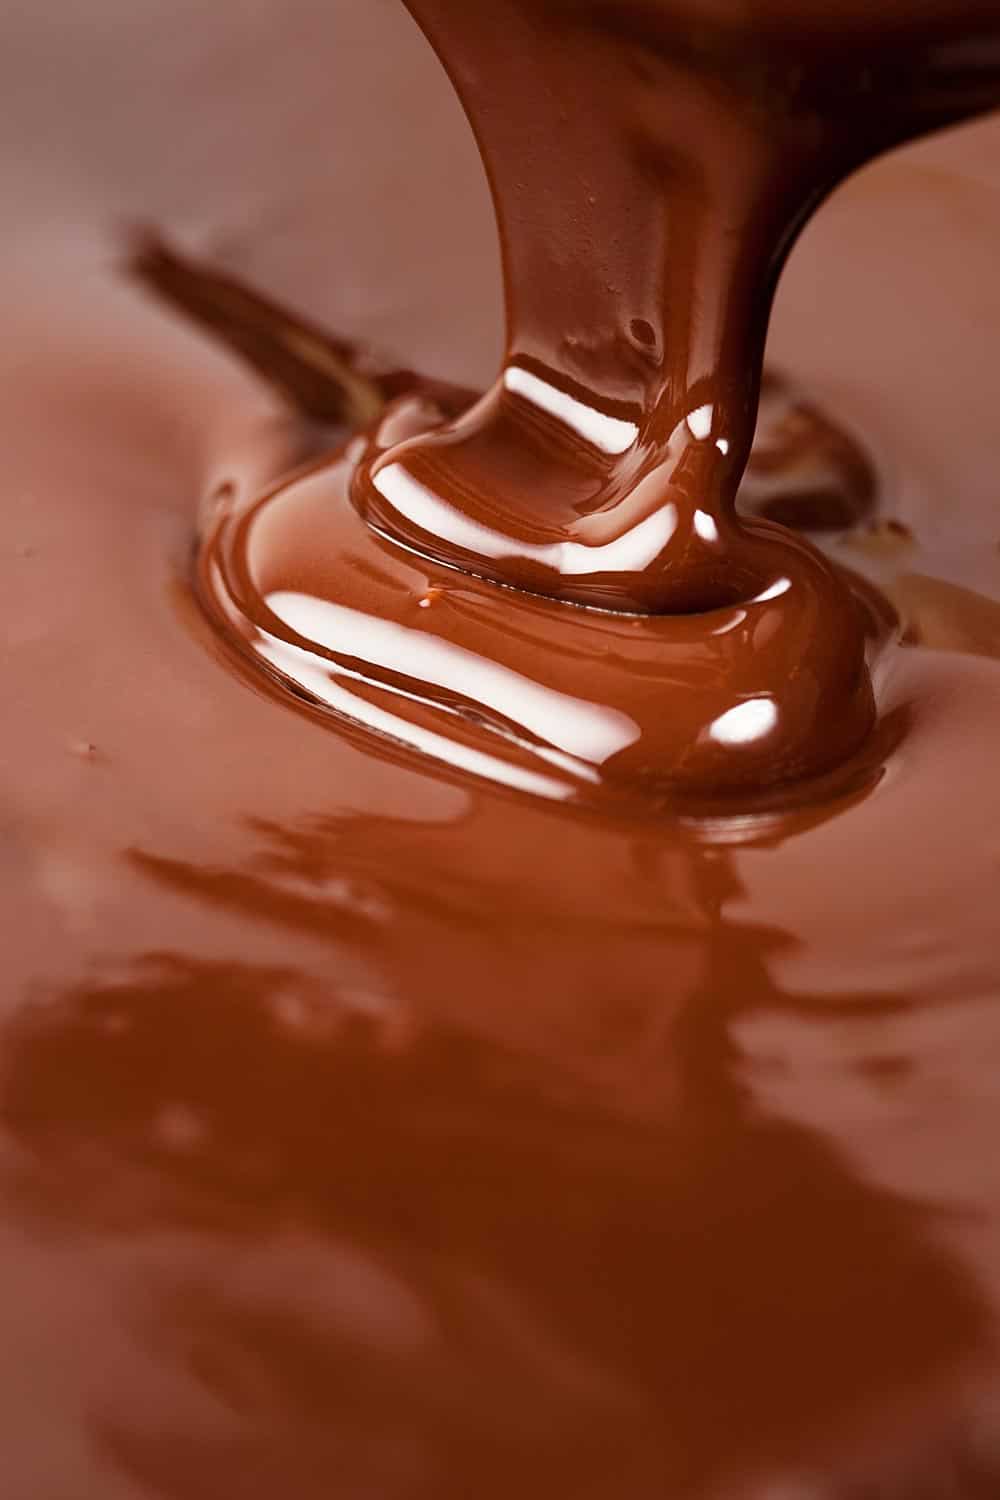 Melted hocolate